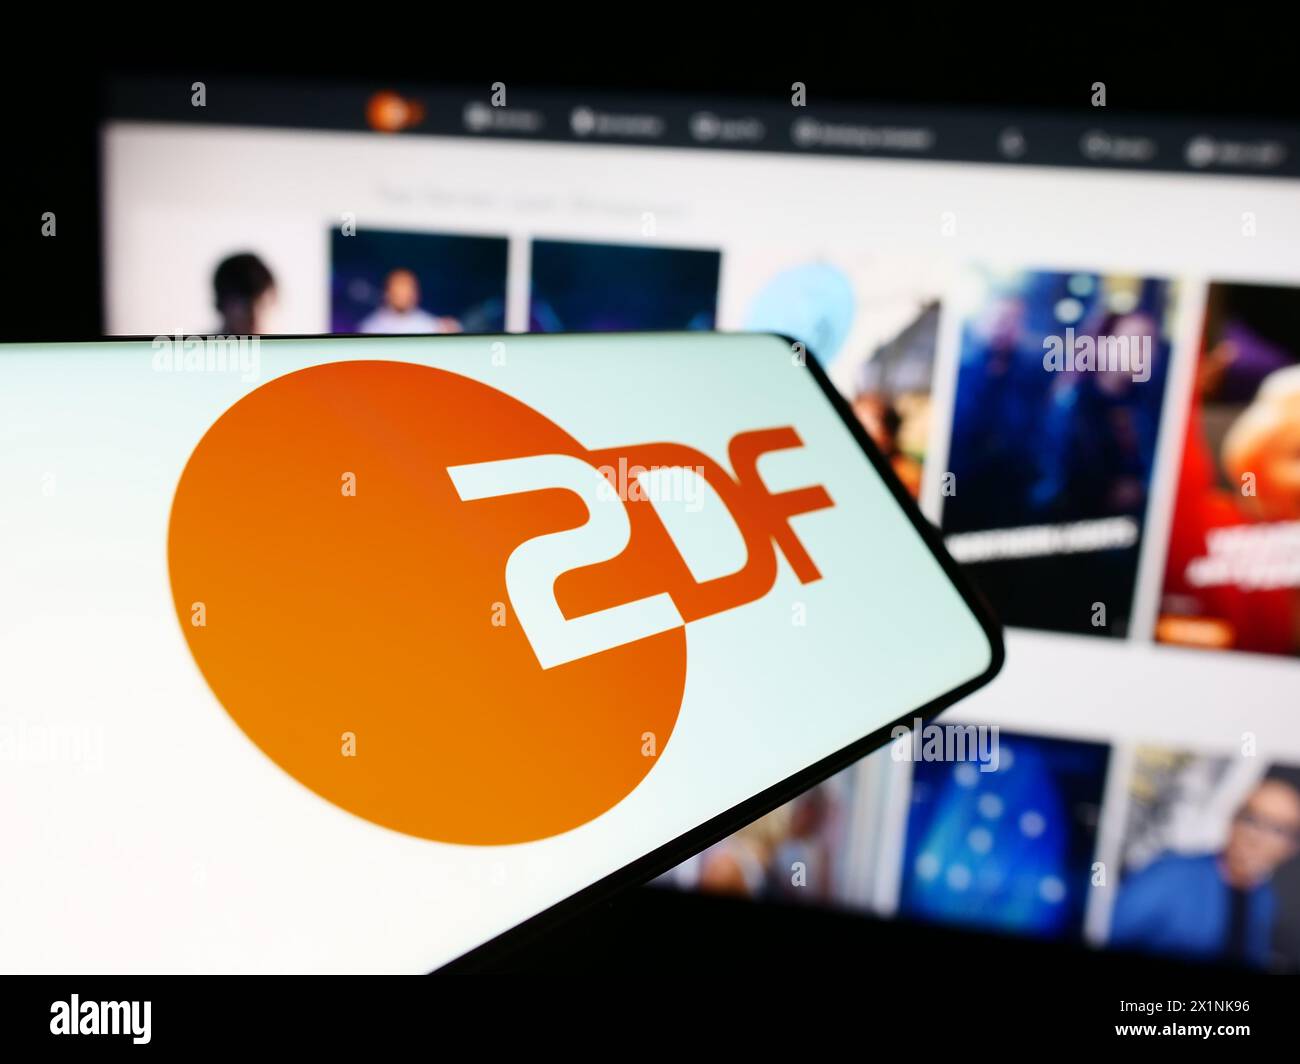 Cellphone with logo of television broadcaster Zweites Deutsches Fernsehen (ZDF) in front of website. Focus on center of phone display. Stock Photo